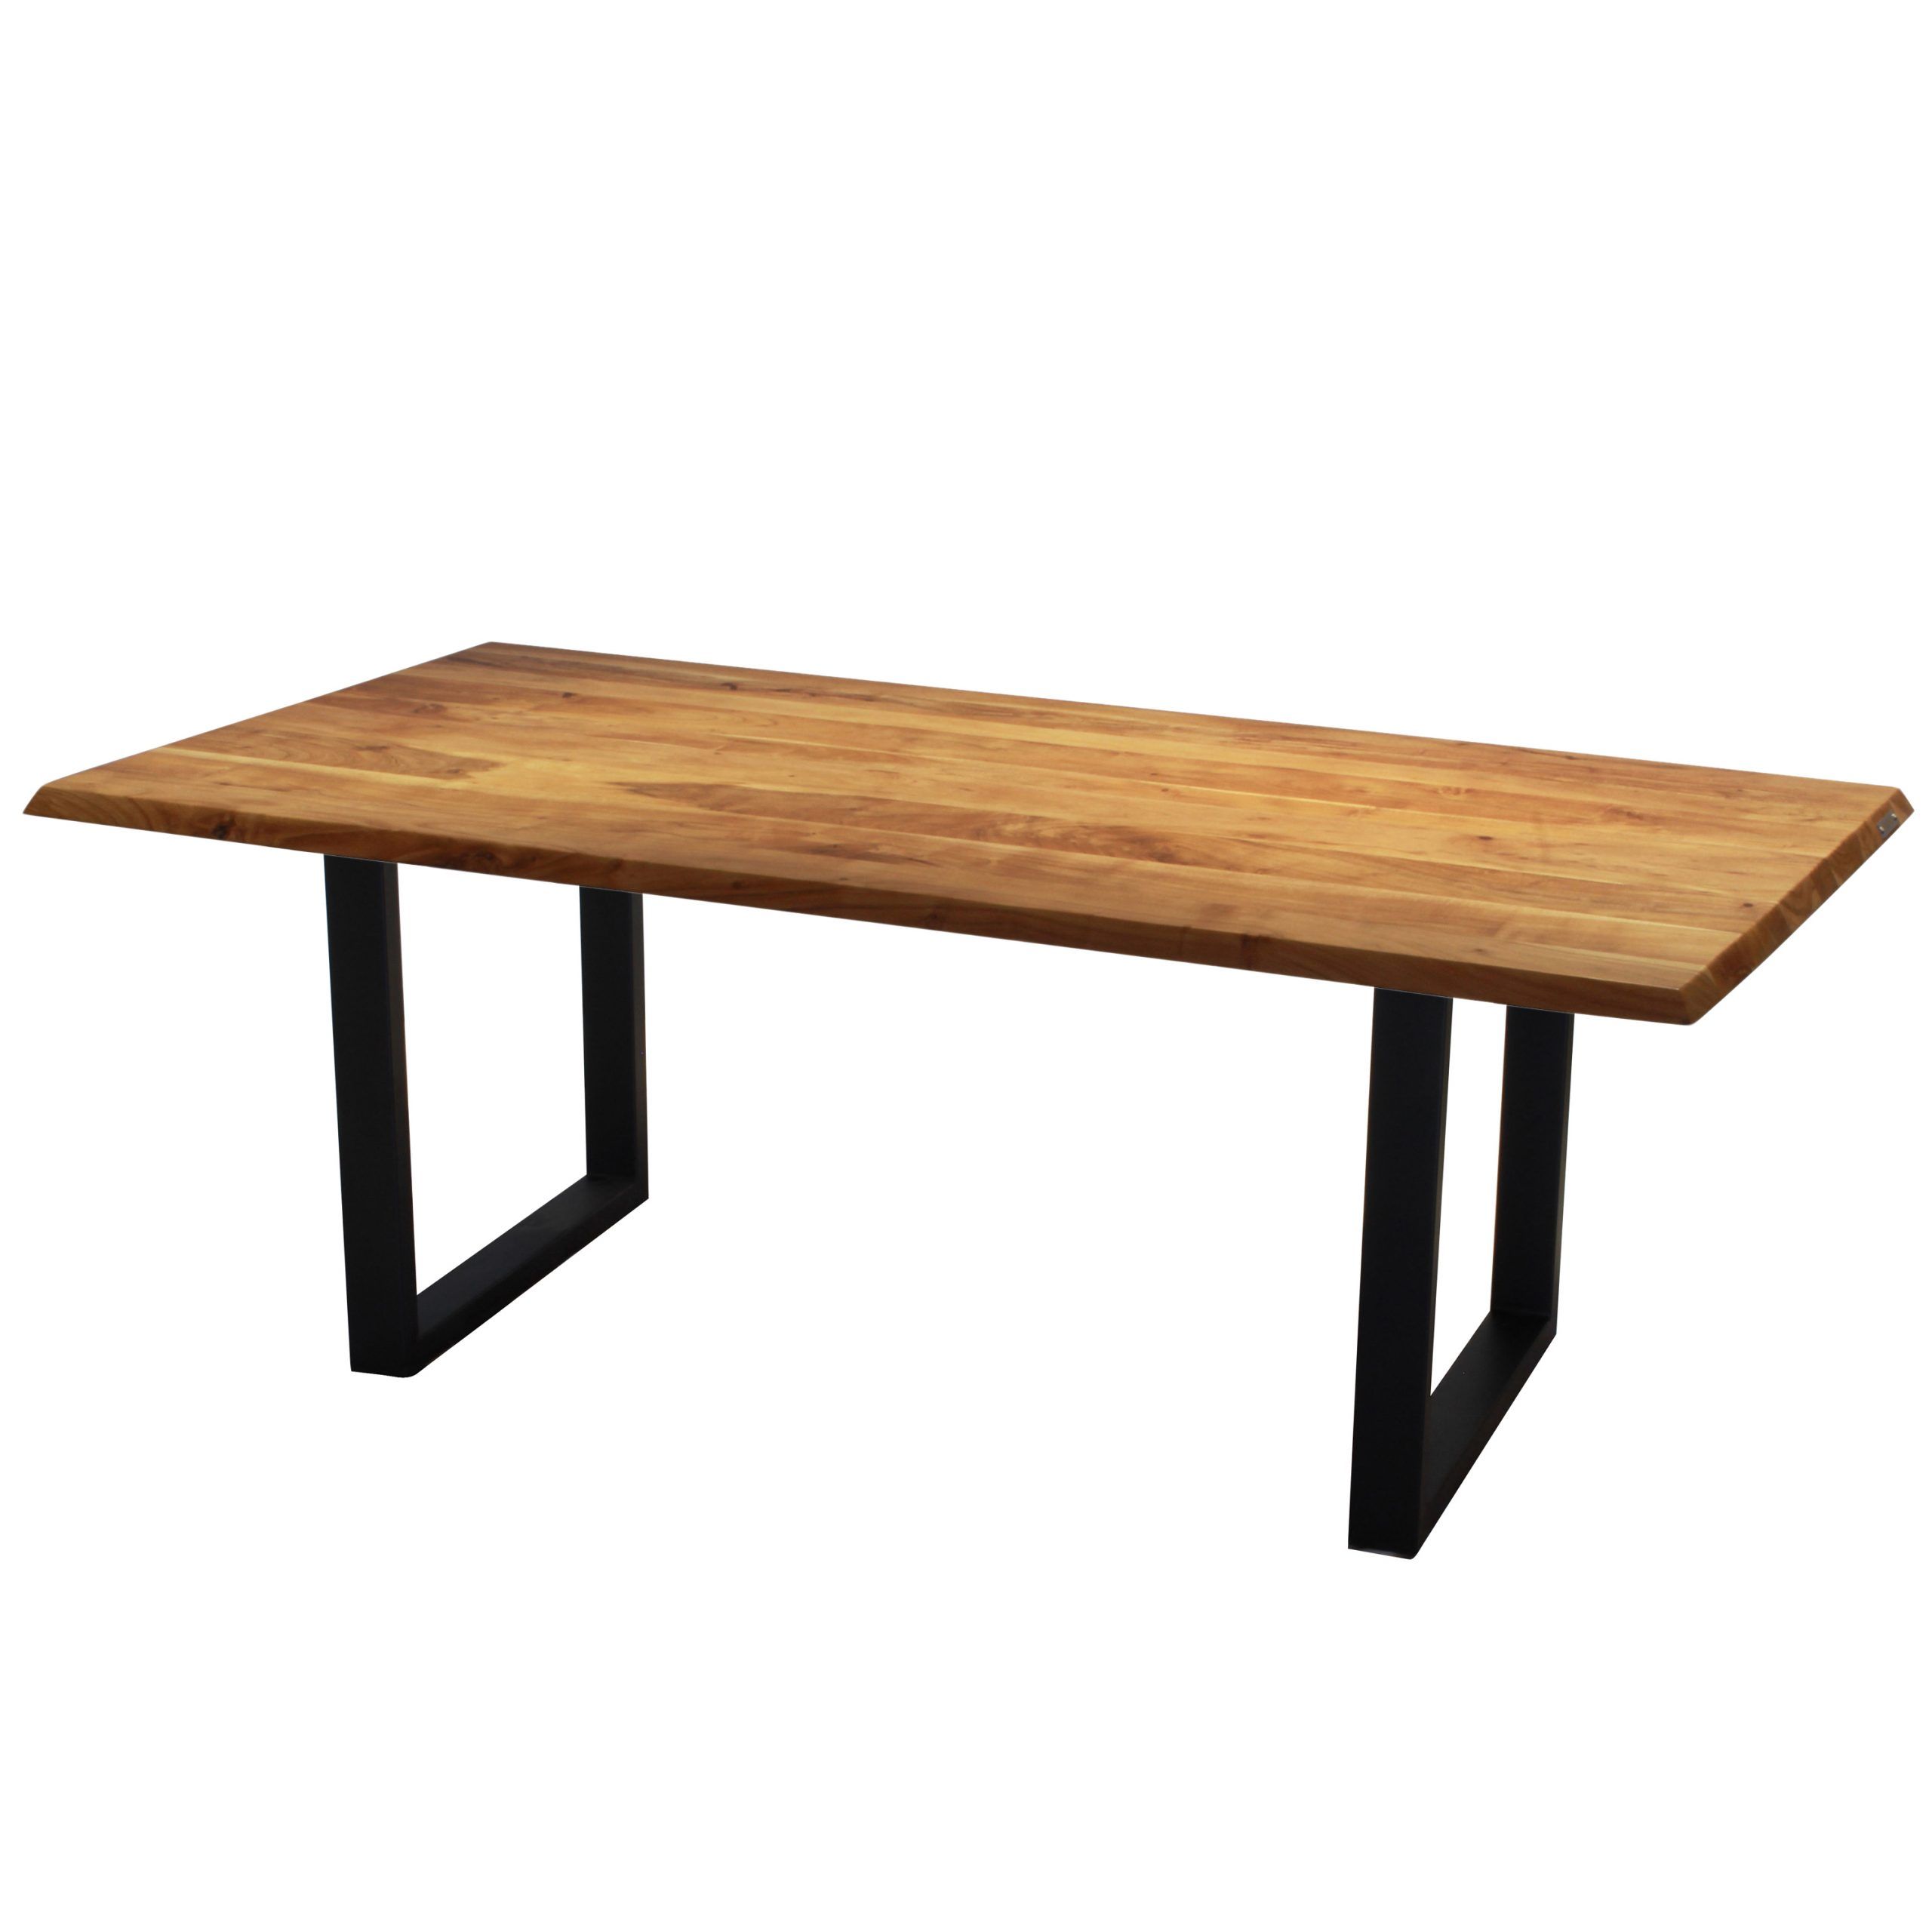 Acacia Dining Tables With Black Victor Legs Within Well Known Corcoran Acacia Live Edge Dining Table With Black Victor Legs – 96" (Photo 2 of 25)